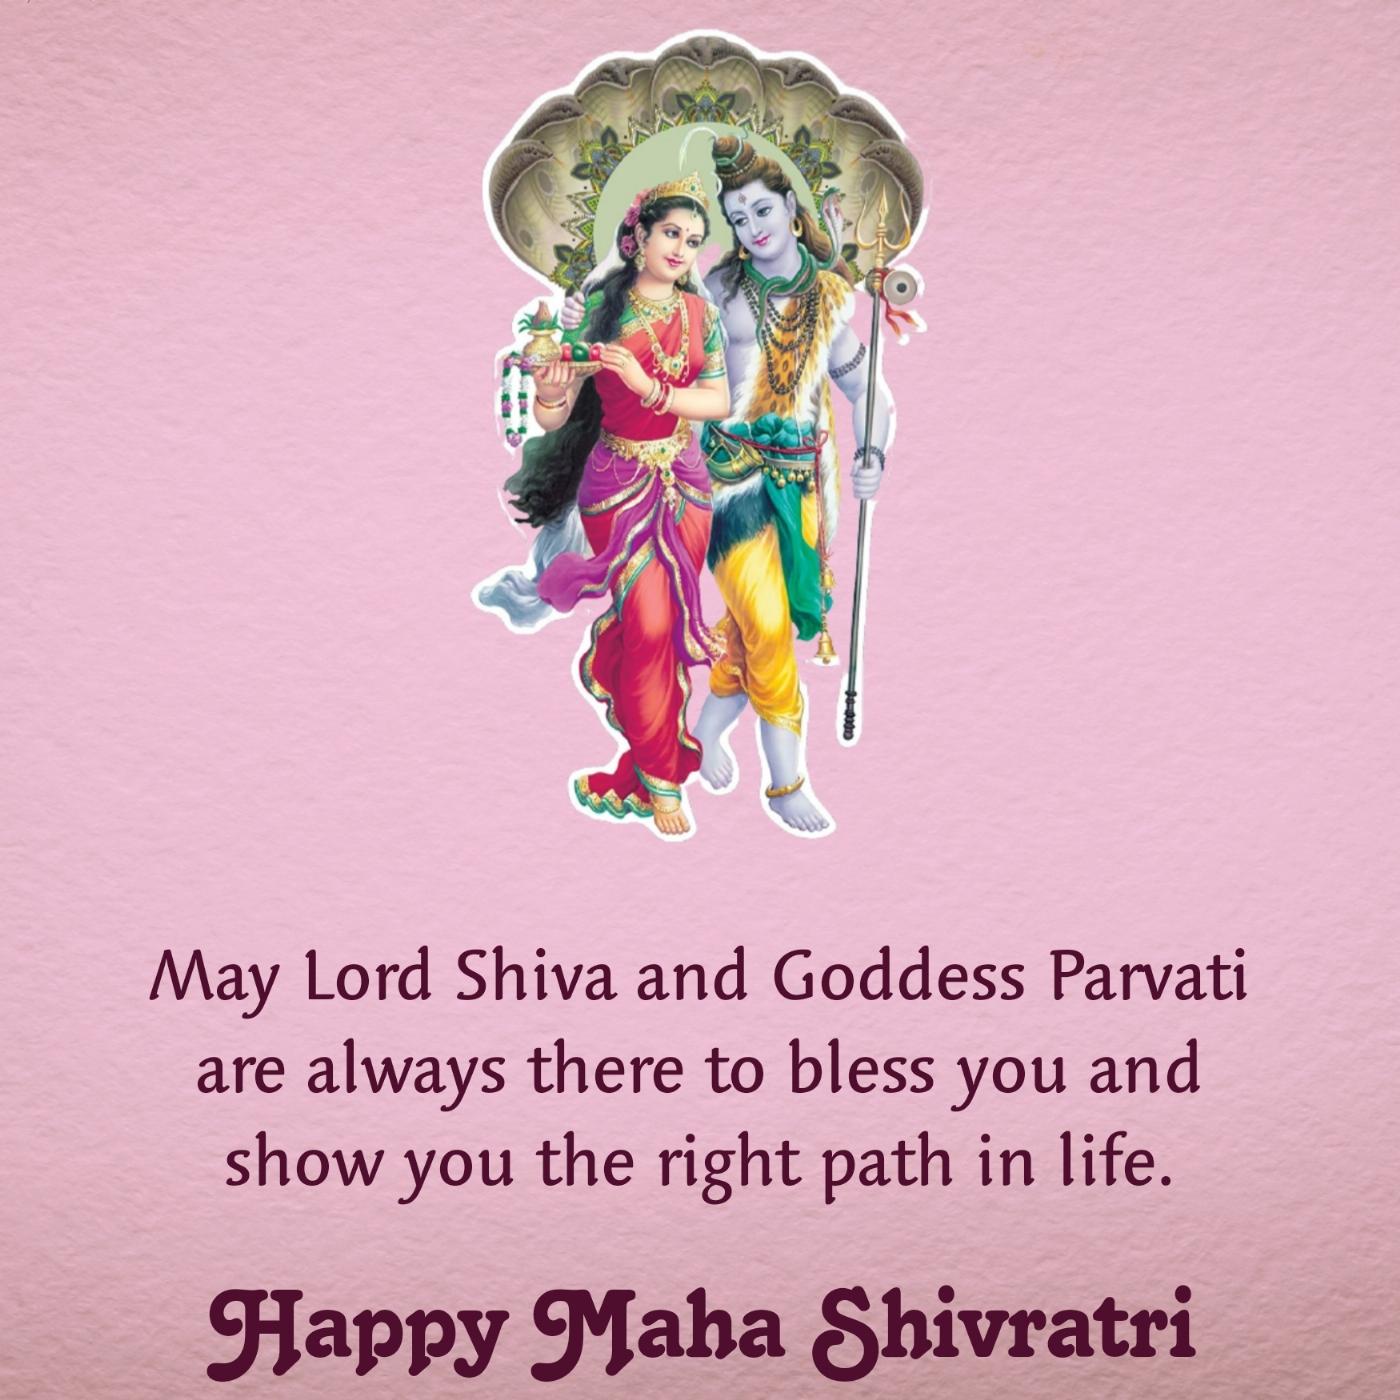 May Lord Shiva and Goddess Parvati are always there to bless you